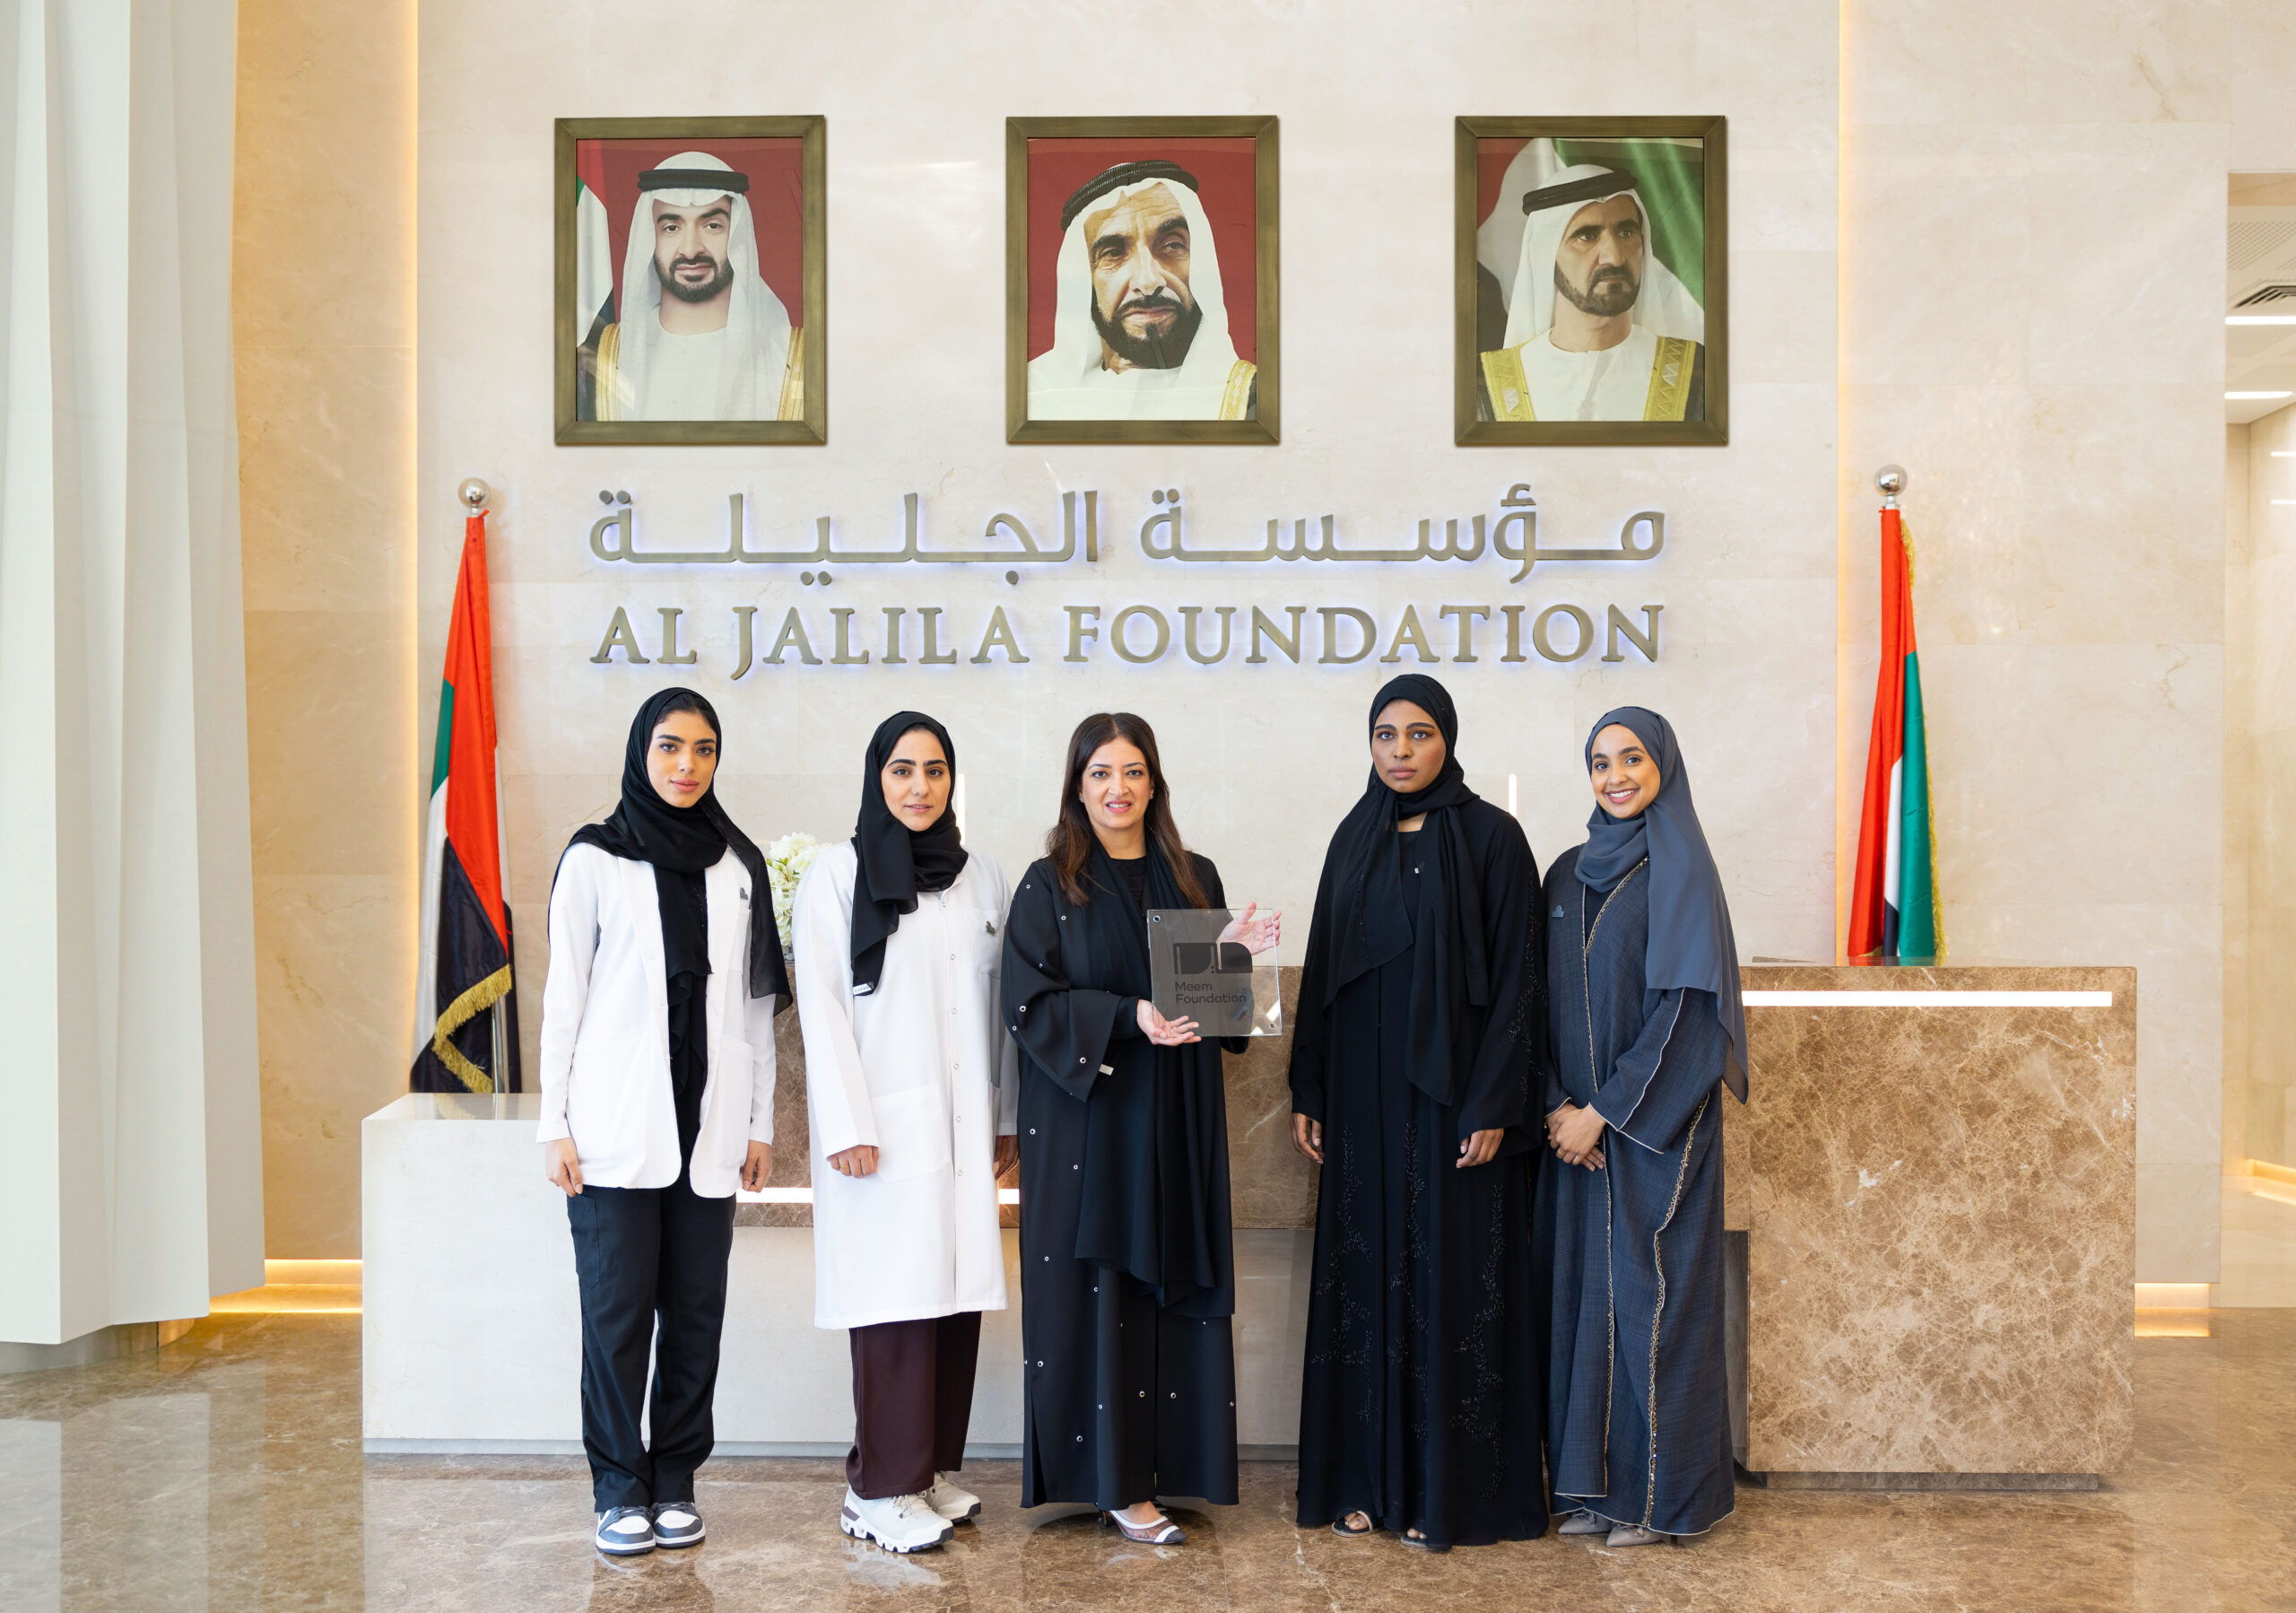 Meem Foundation donates AED 3 million to Al Jalila Foundation to support health and education programs to empower women and girls